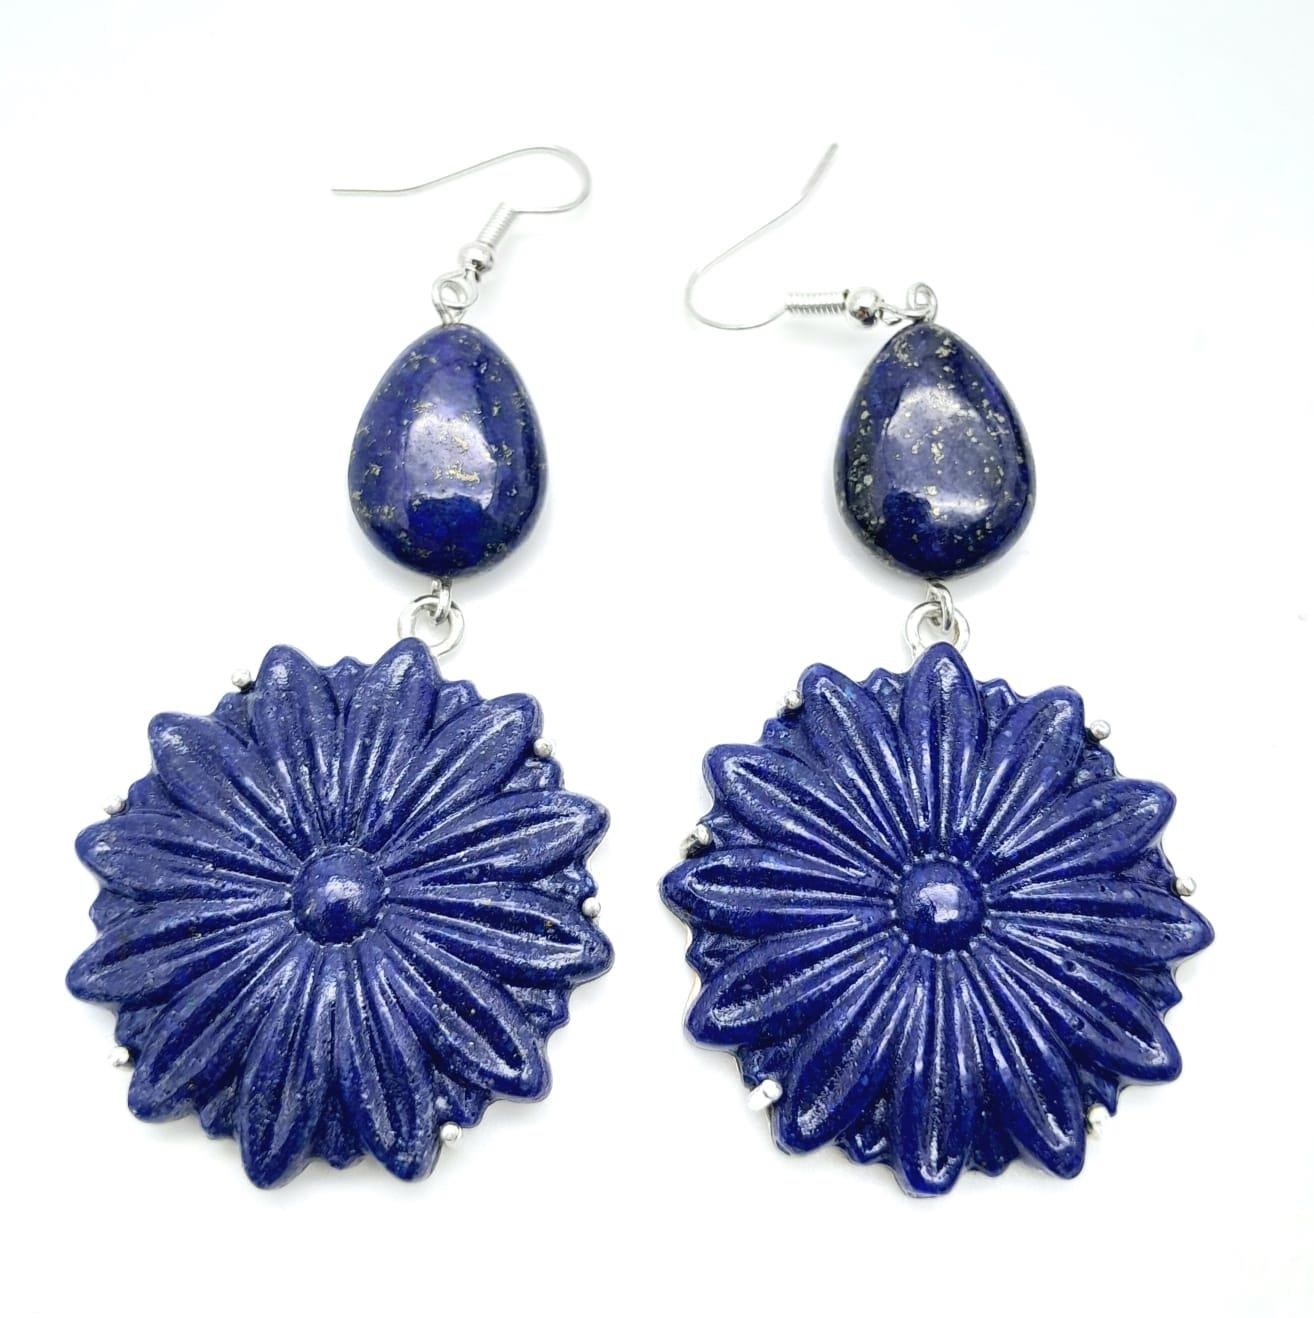 A Tibetan silver and lapis lazuli necklace and earrings set with large, carved, flower shaped discs. - Image 4 of 5